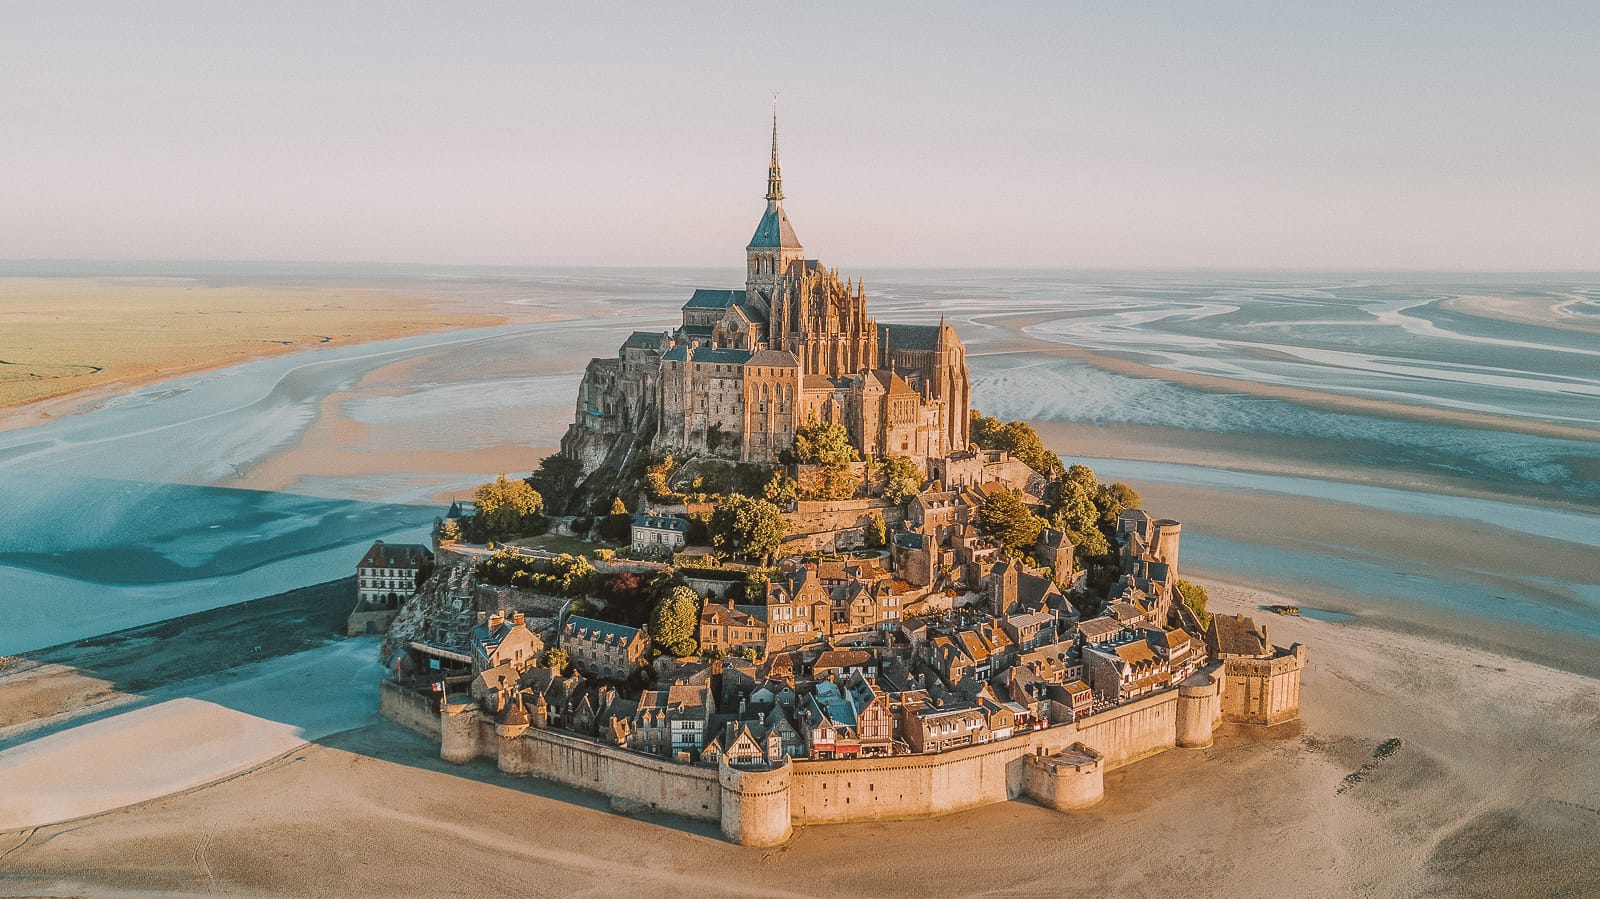 60 Most Stunning Pictures Of The Mont Saint Michel in France